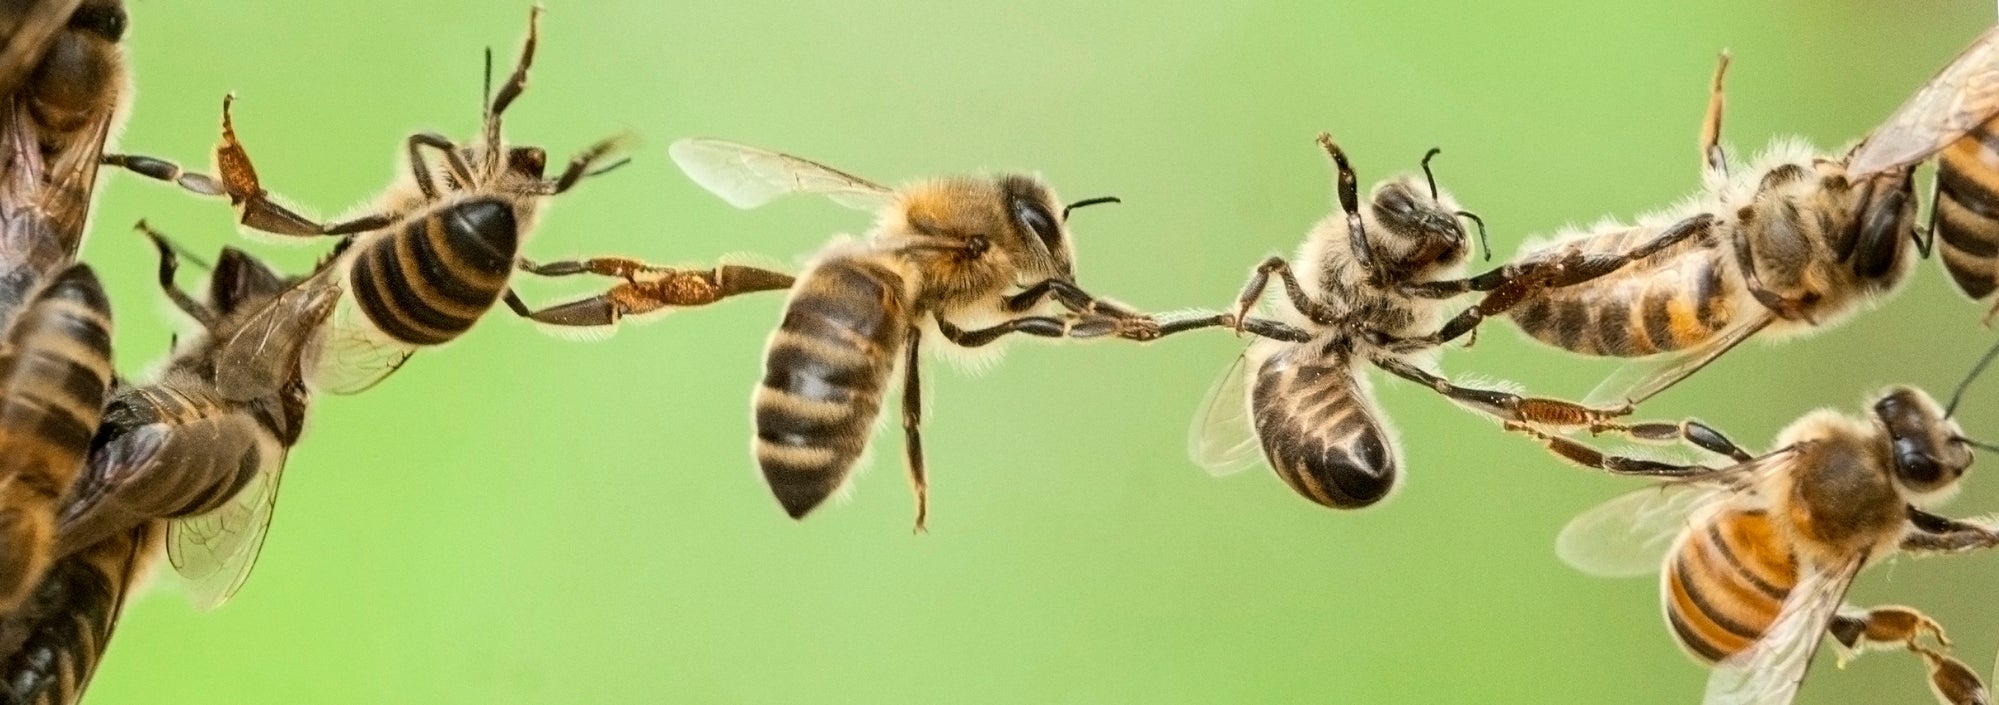 Do we still need to save the bees? thumbnail